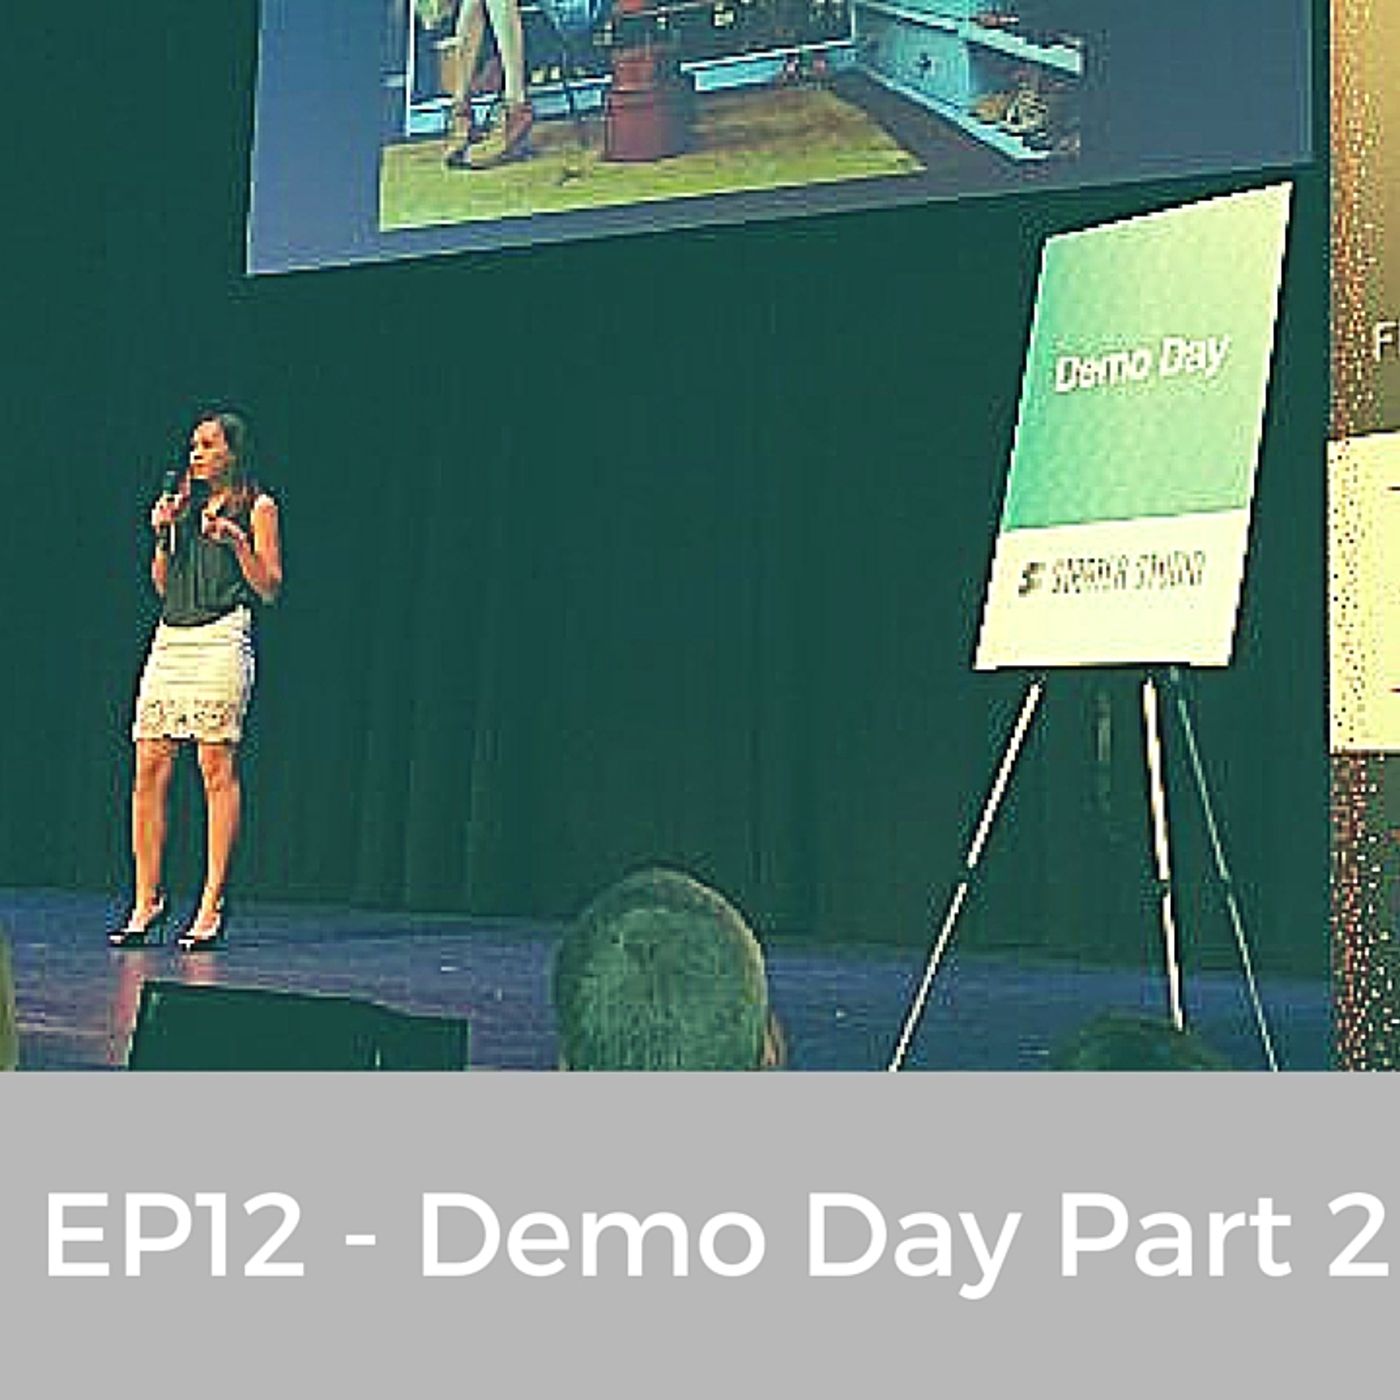 EP12 - Demo Day Part 2